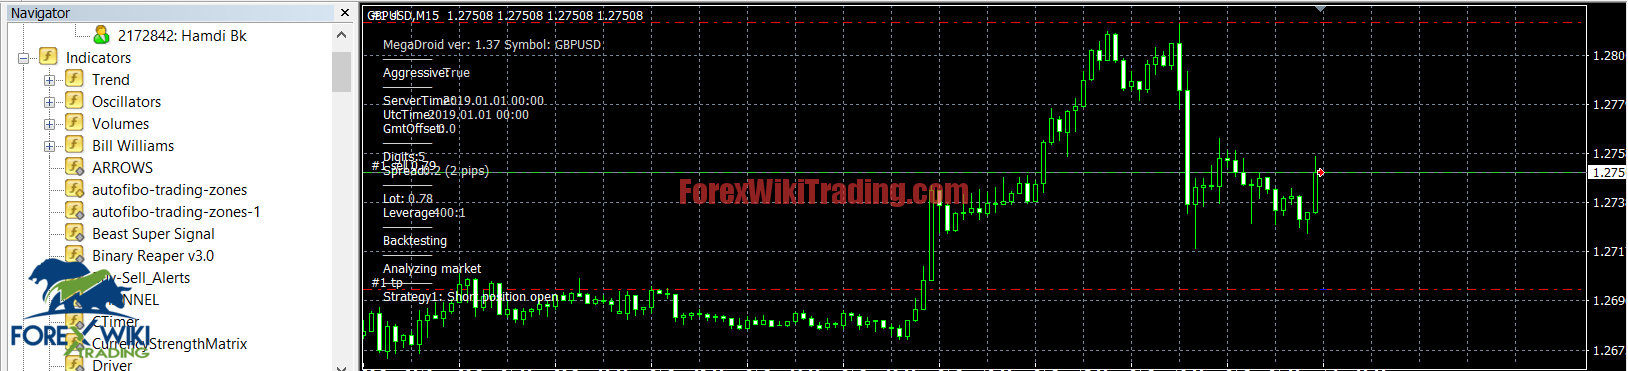 Forex mega droid results physiotherapy syed bokhari investing in gold